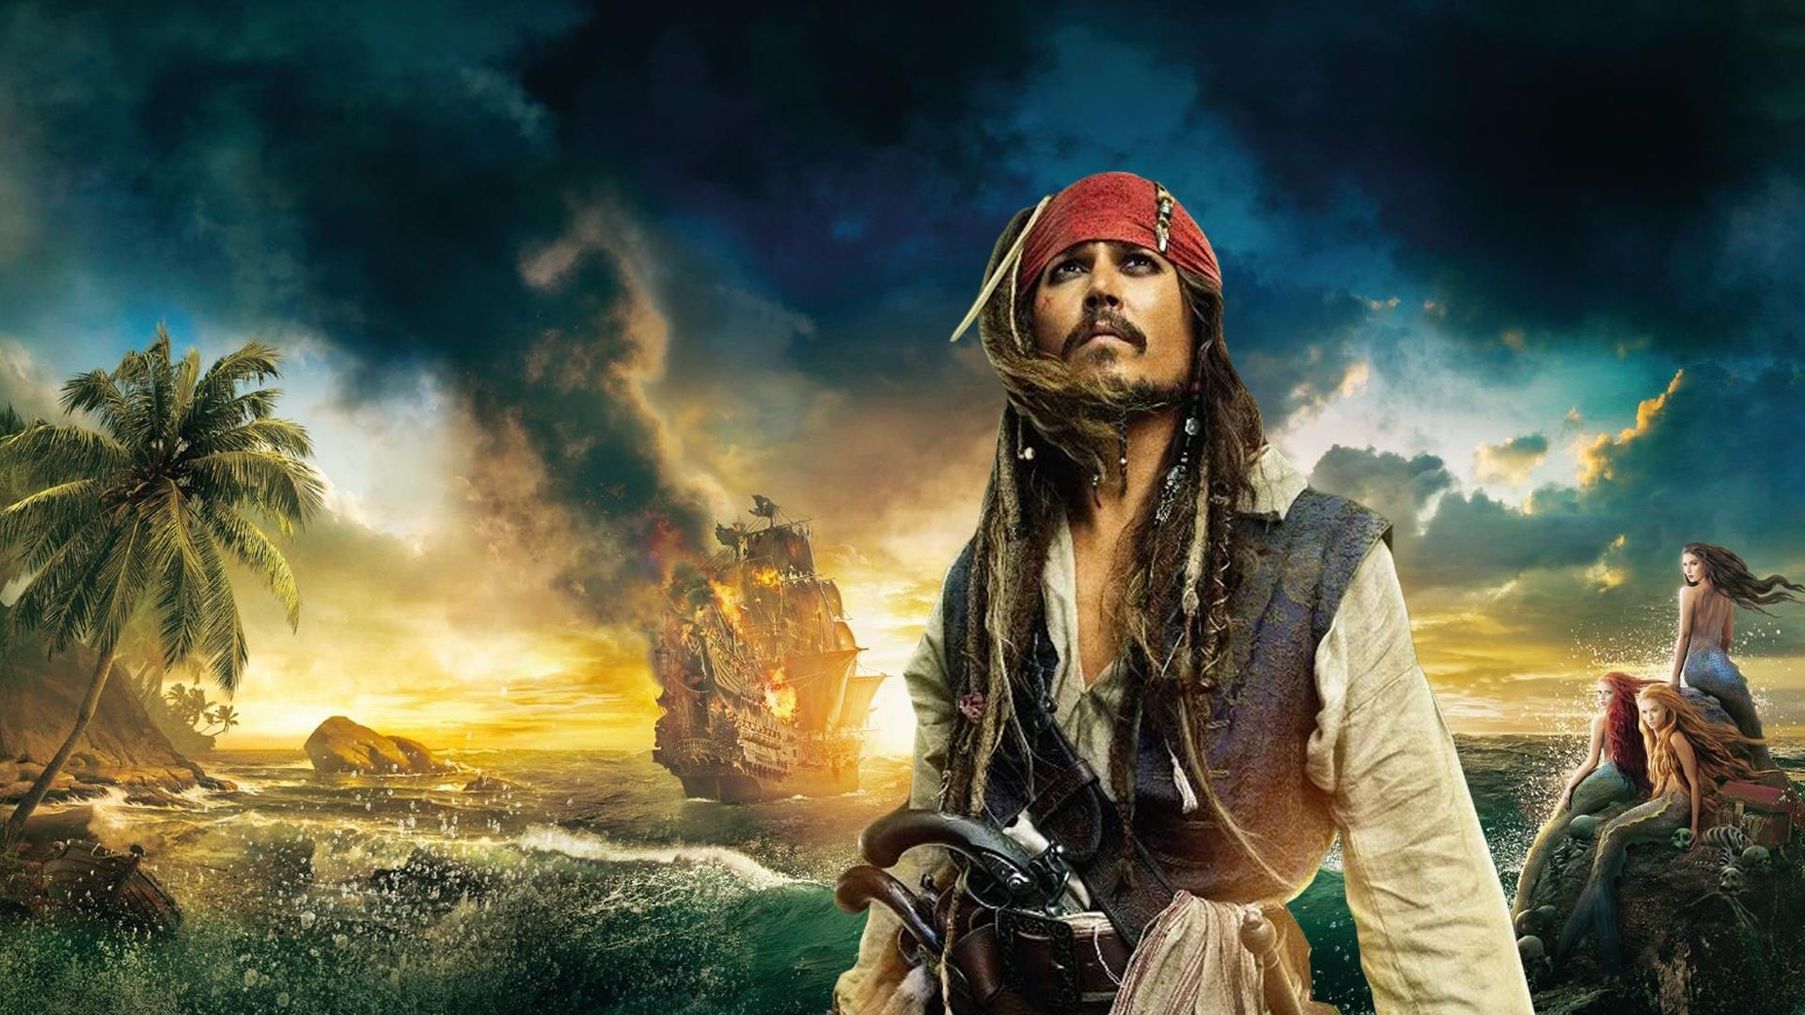 Image Of Pirate